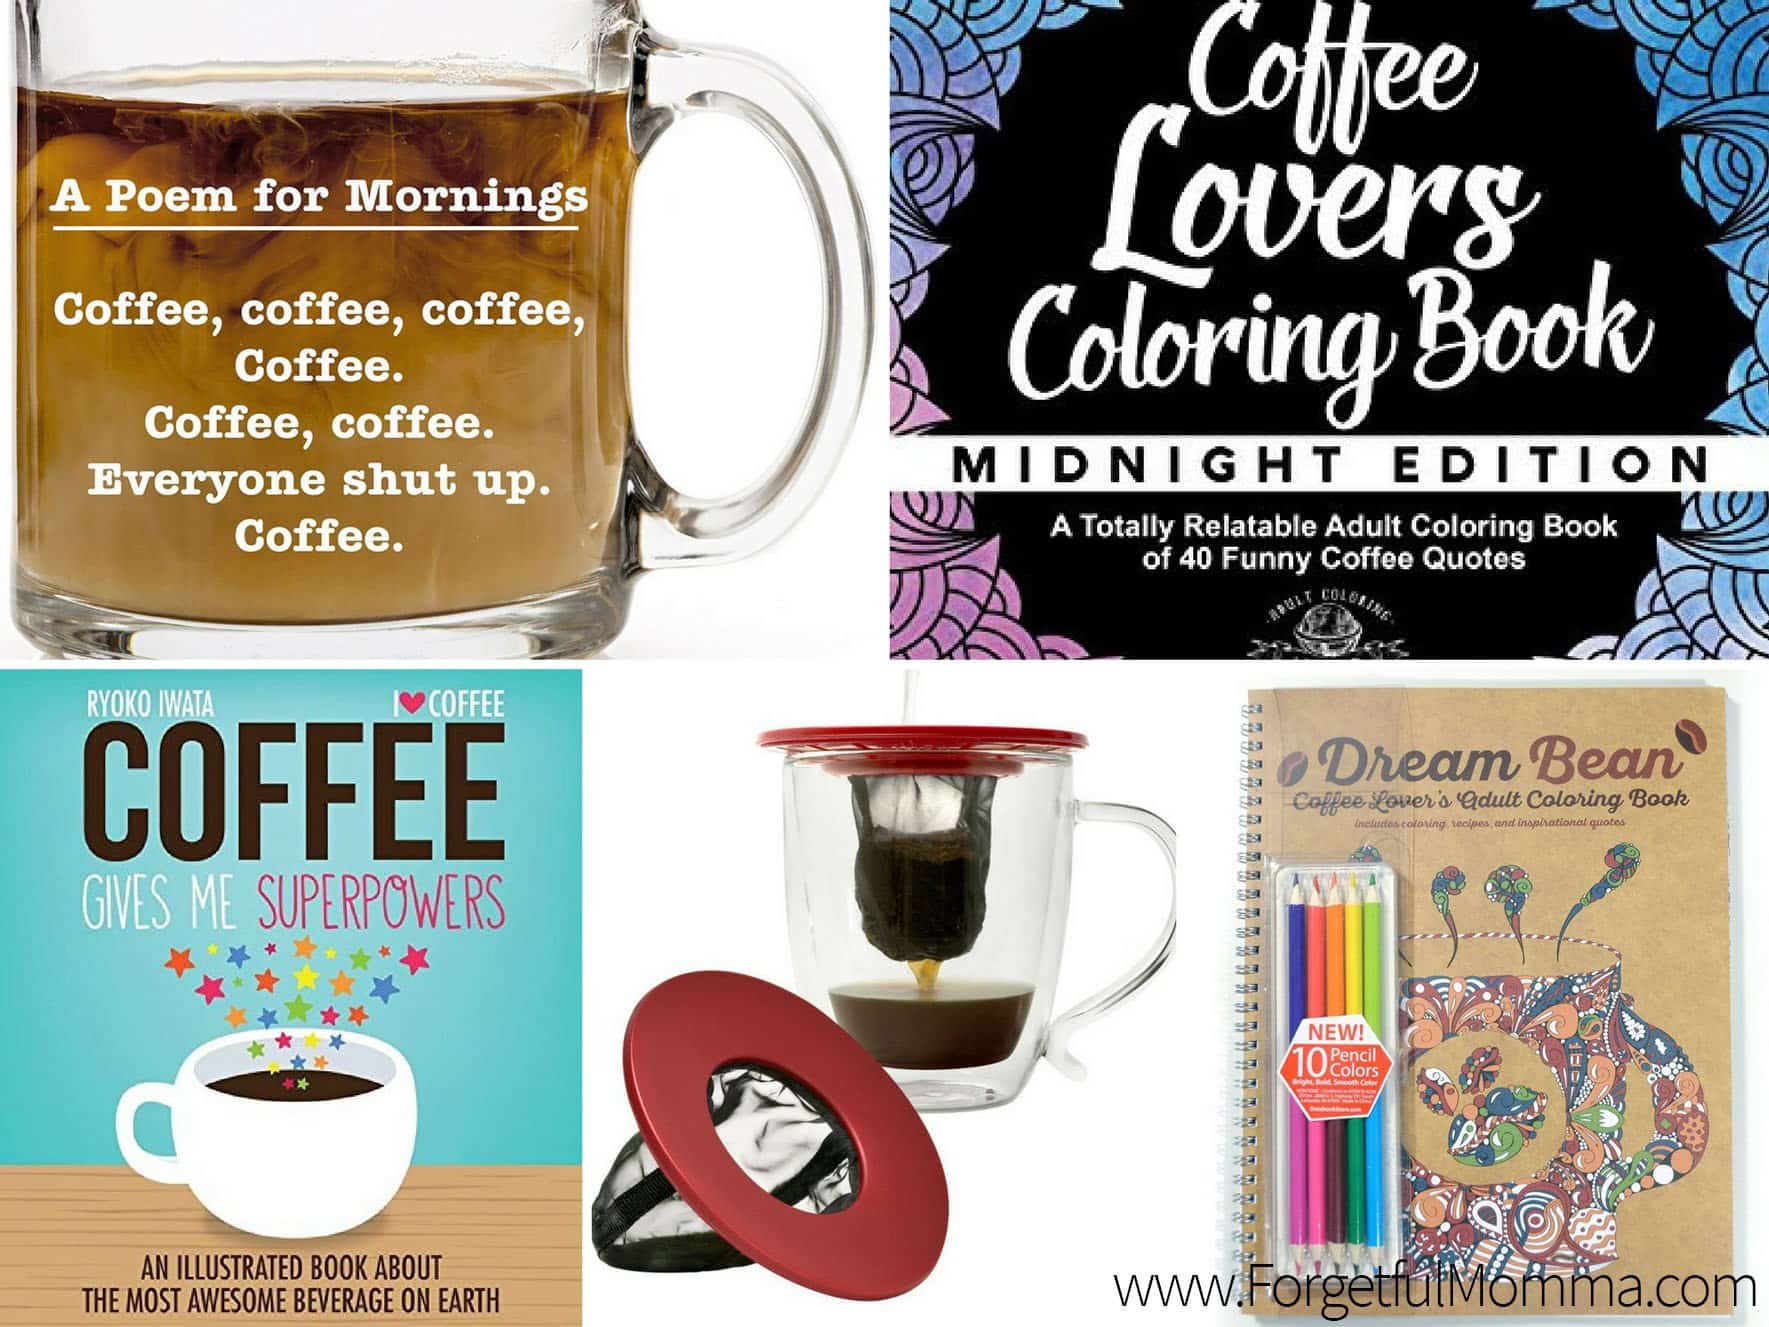 10 Gifts for the Coffee Lover in Your Life